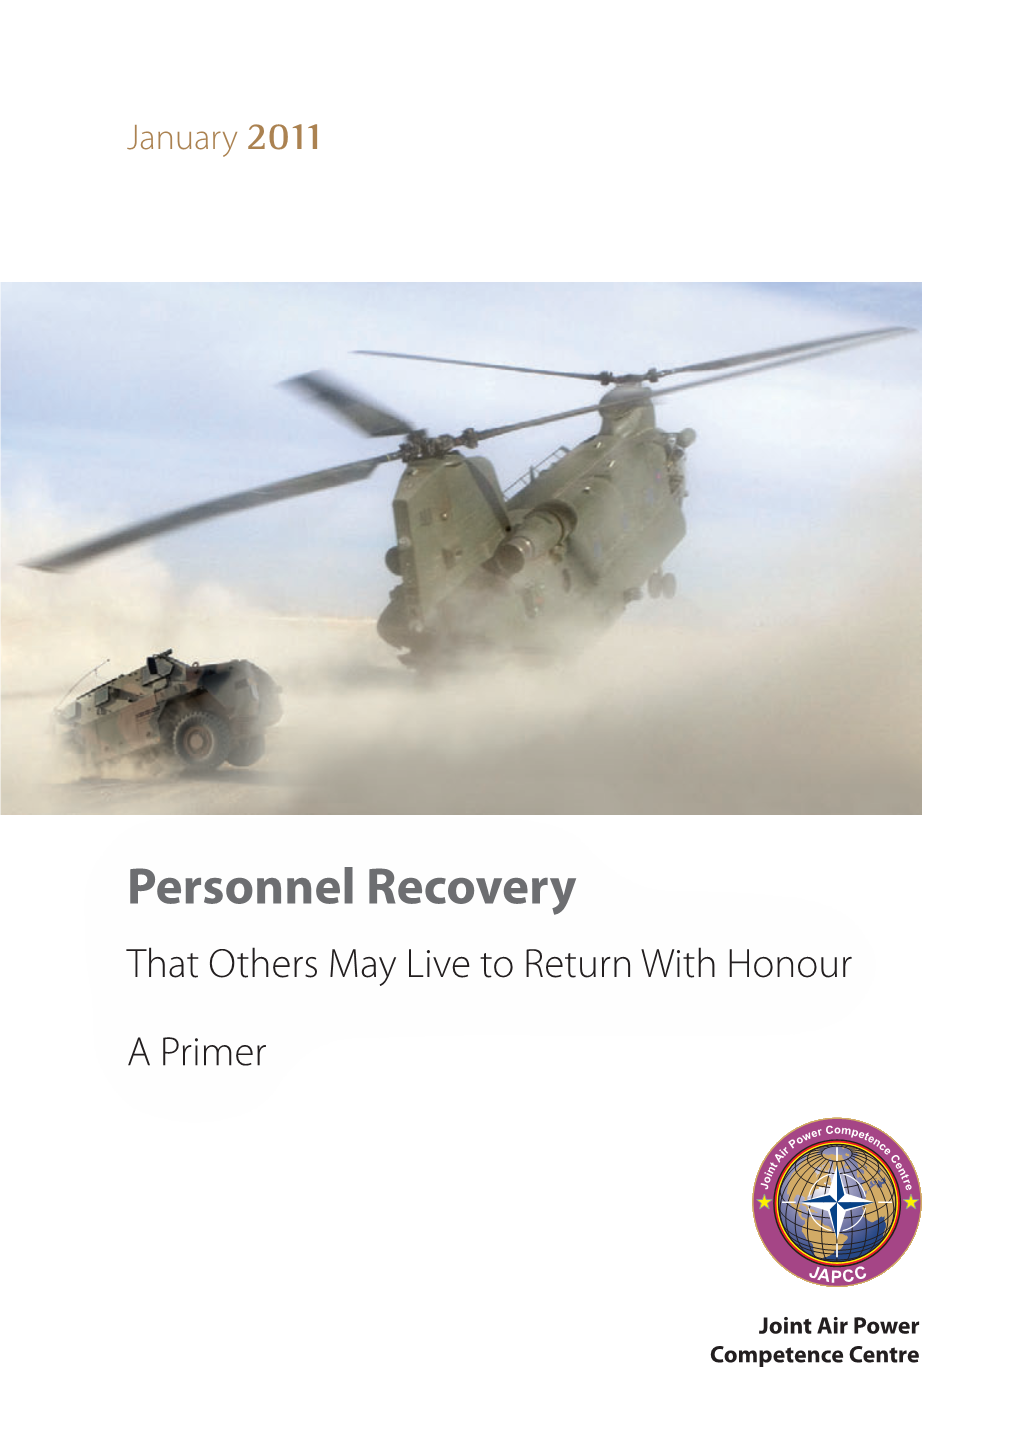 Personnel Recovery That Others May Live to Return with Honour